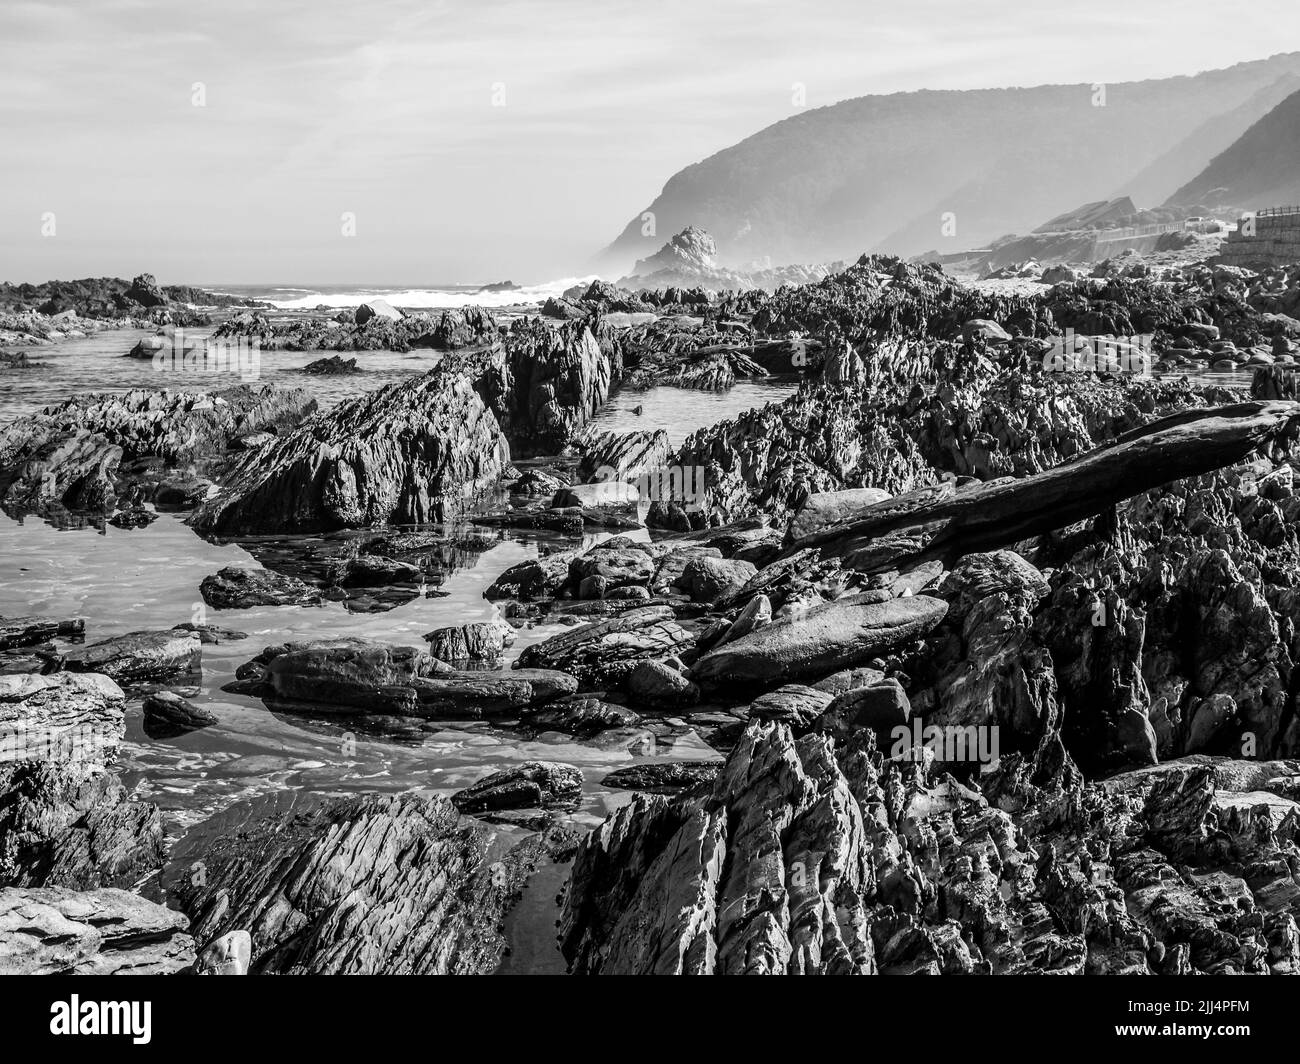 The Jagged rocky coastline along the southern South African coast, with the Tsitsikamma Mountains rising in the background. Stock Photo